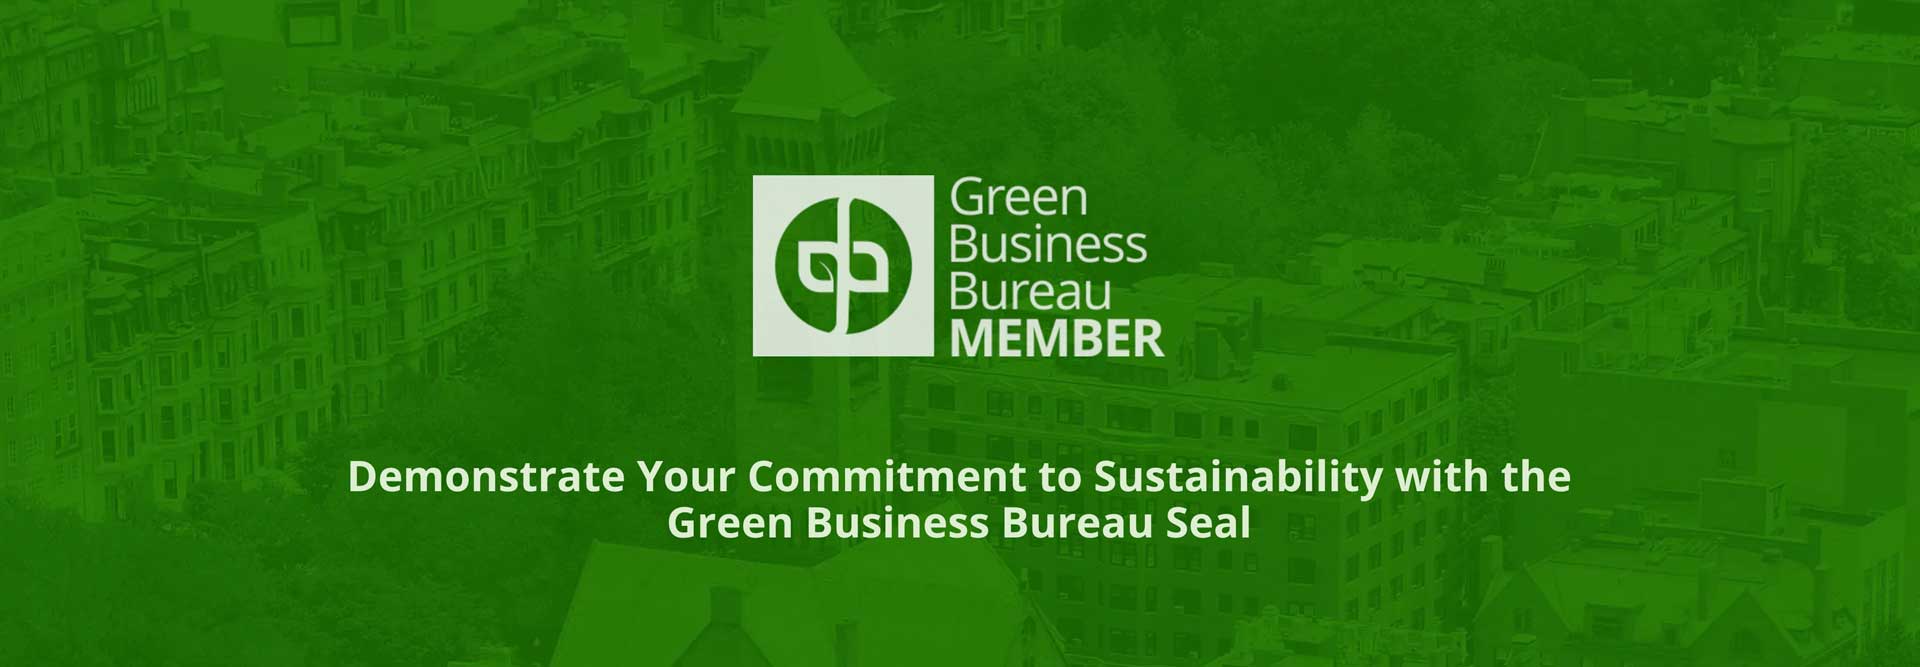 SYNLawn Joins the Green Business Bureau